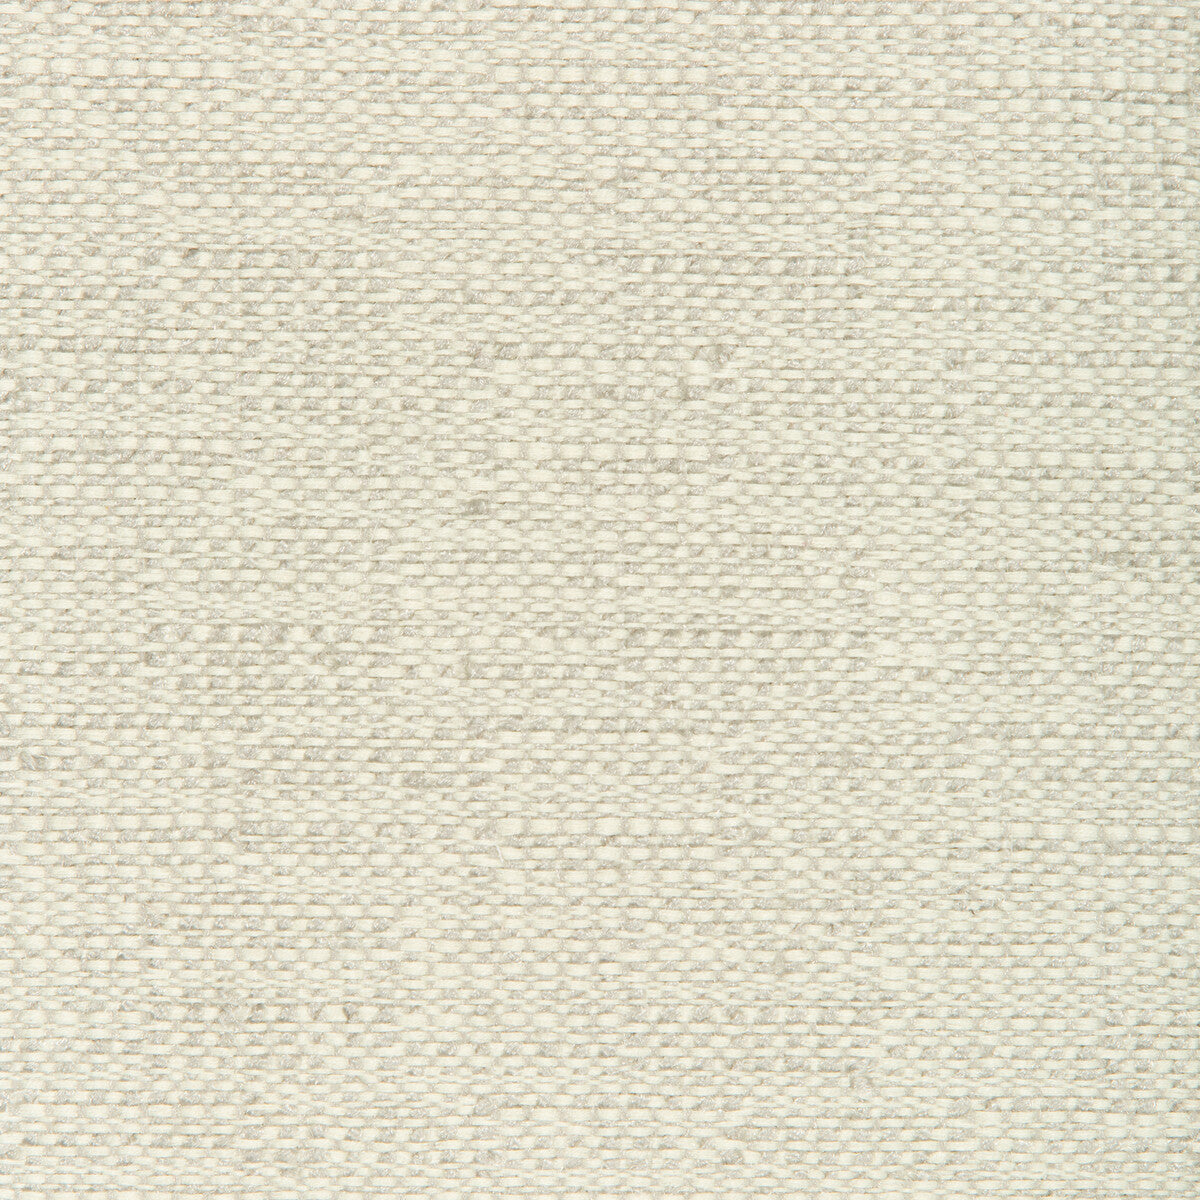 Kravet Smart fabric in 34616-11 color - pattern 34616.11.0 - by Kravet Smart in the Performance Crypton Home collection